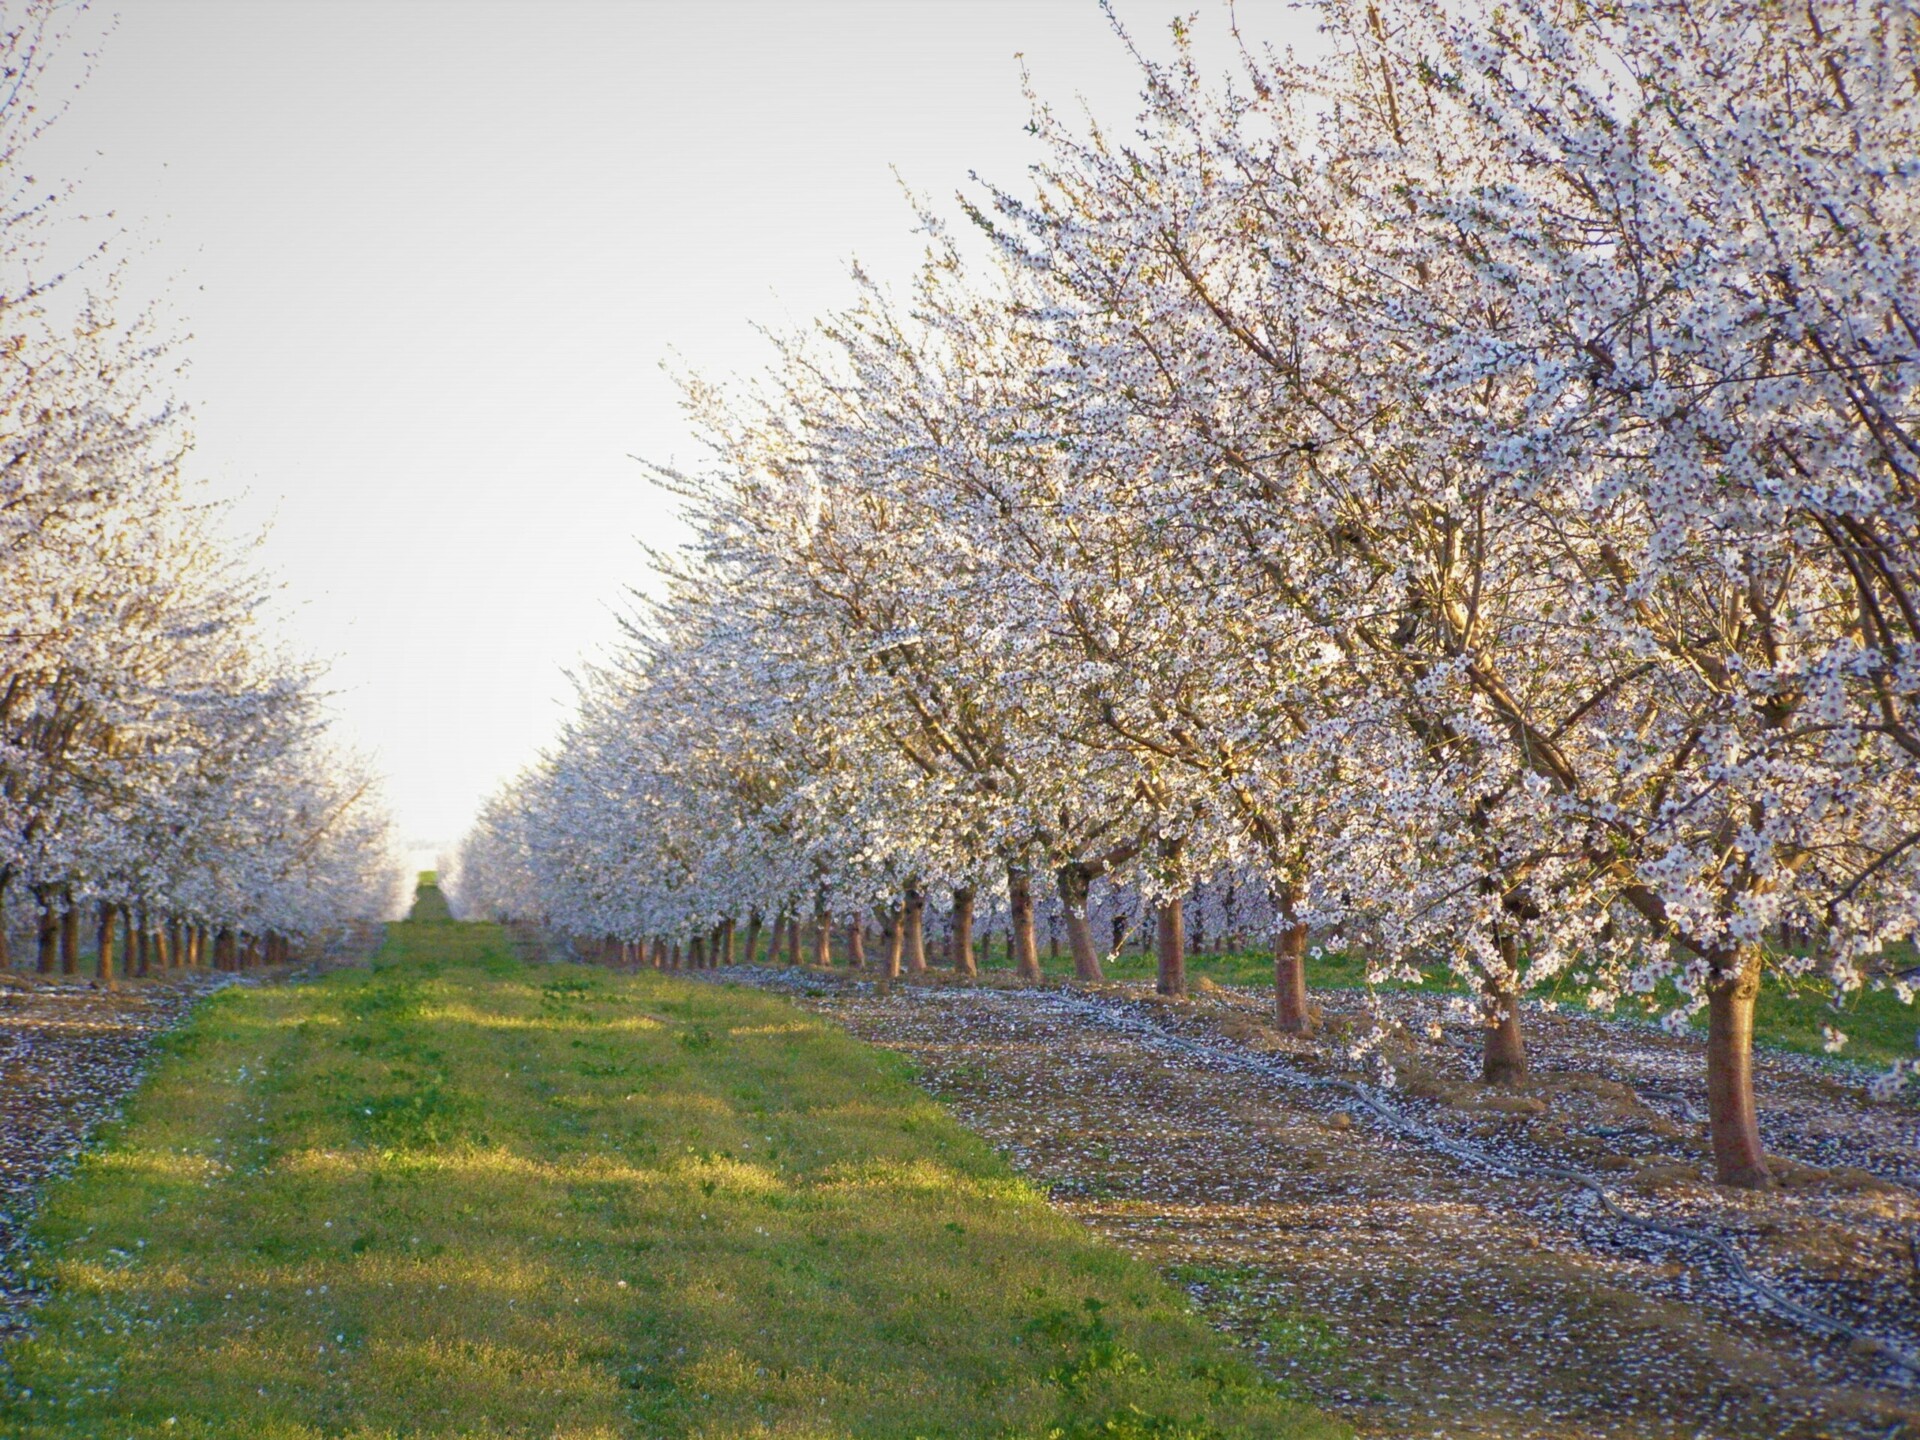 Valley Fresh foods values the environment with sustainably grown almonds